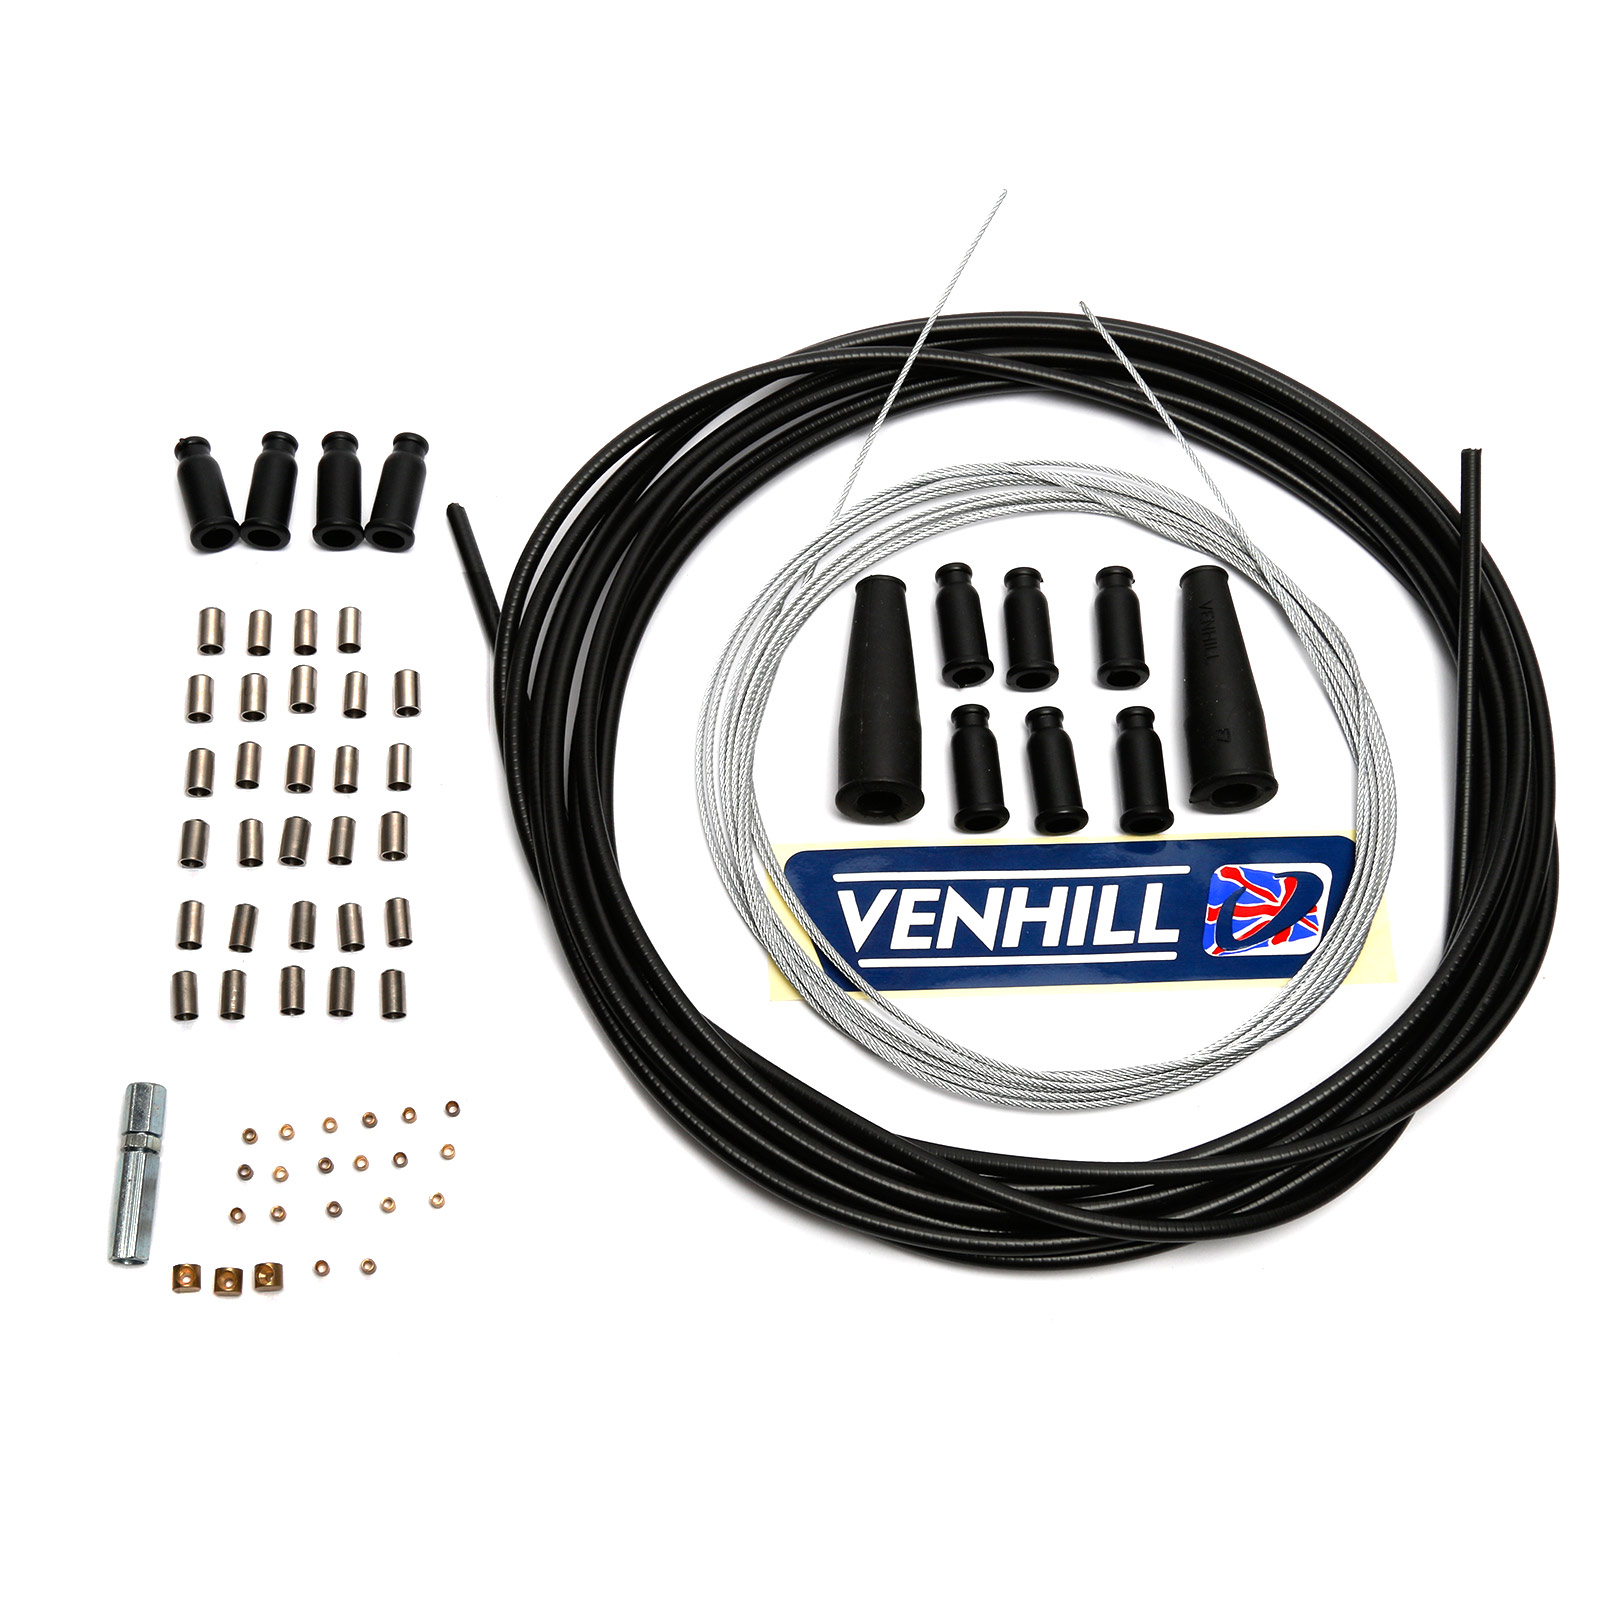 Venhill Diy Workshop Motorcycle Throttle Cable Kit 5m Ferrules Nipples More Mpw